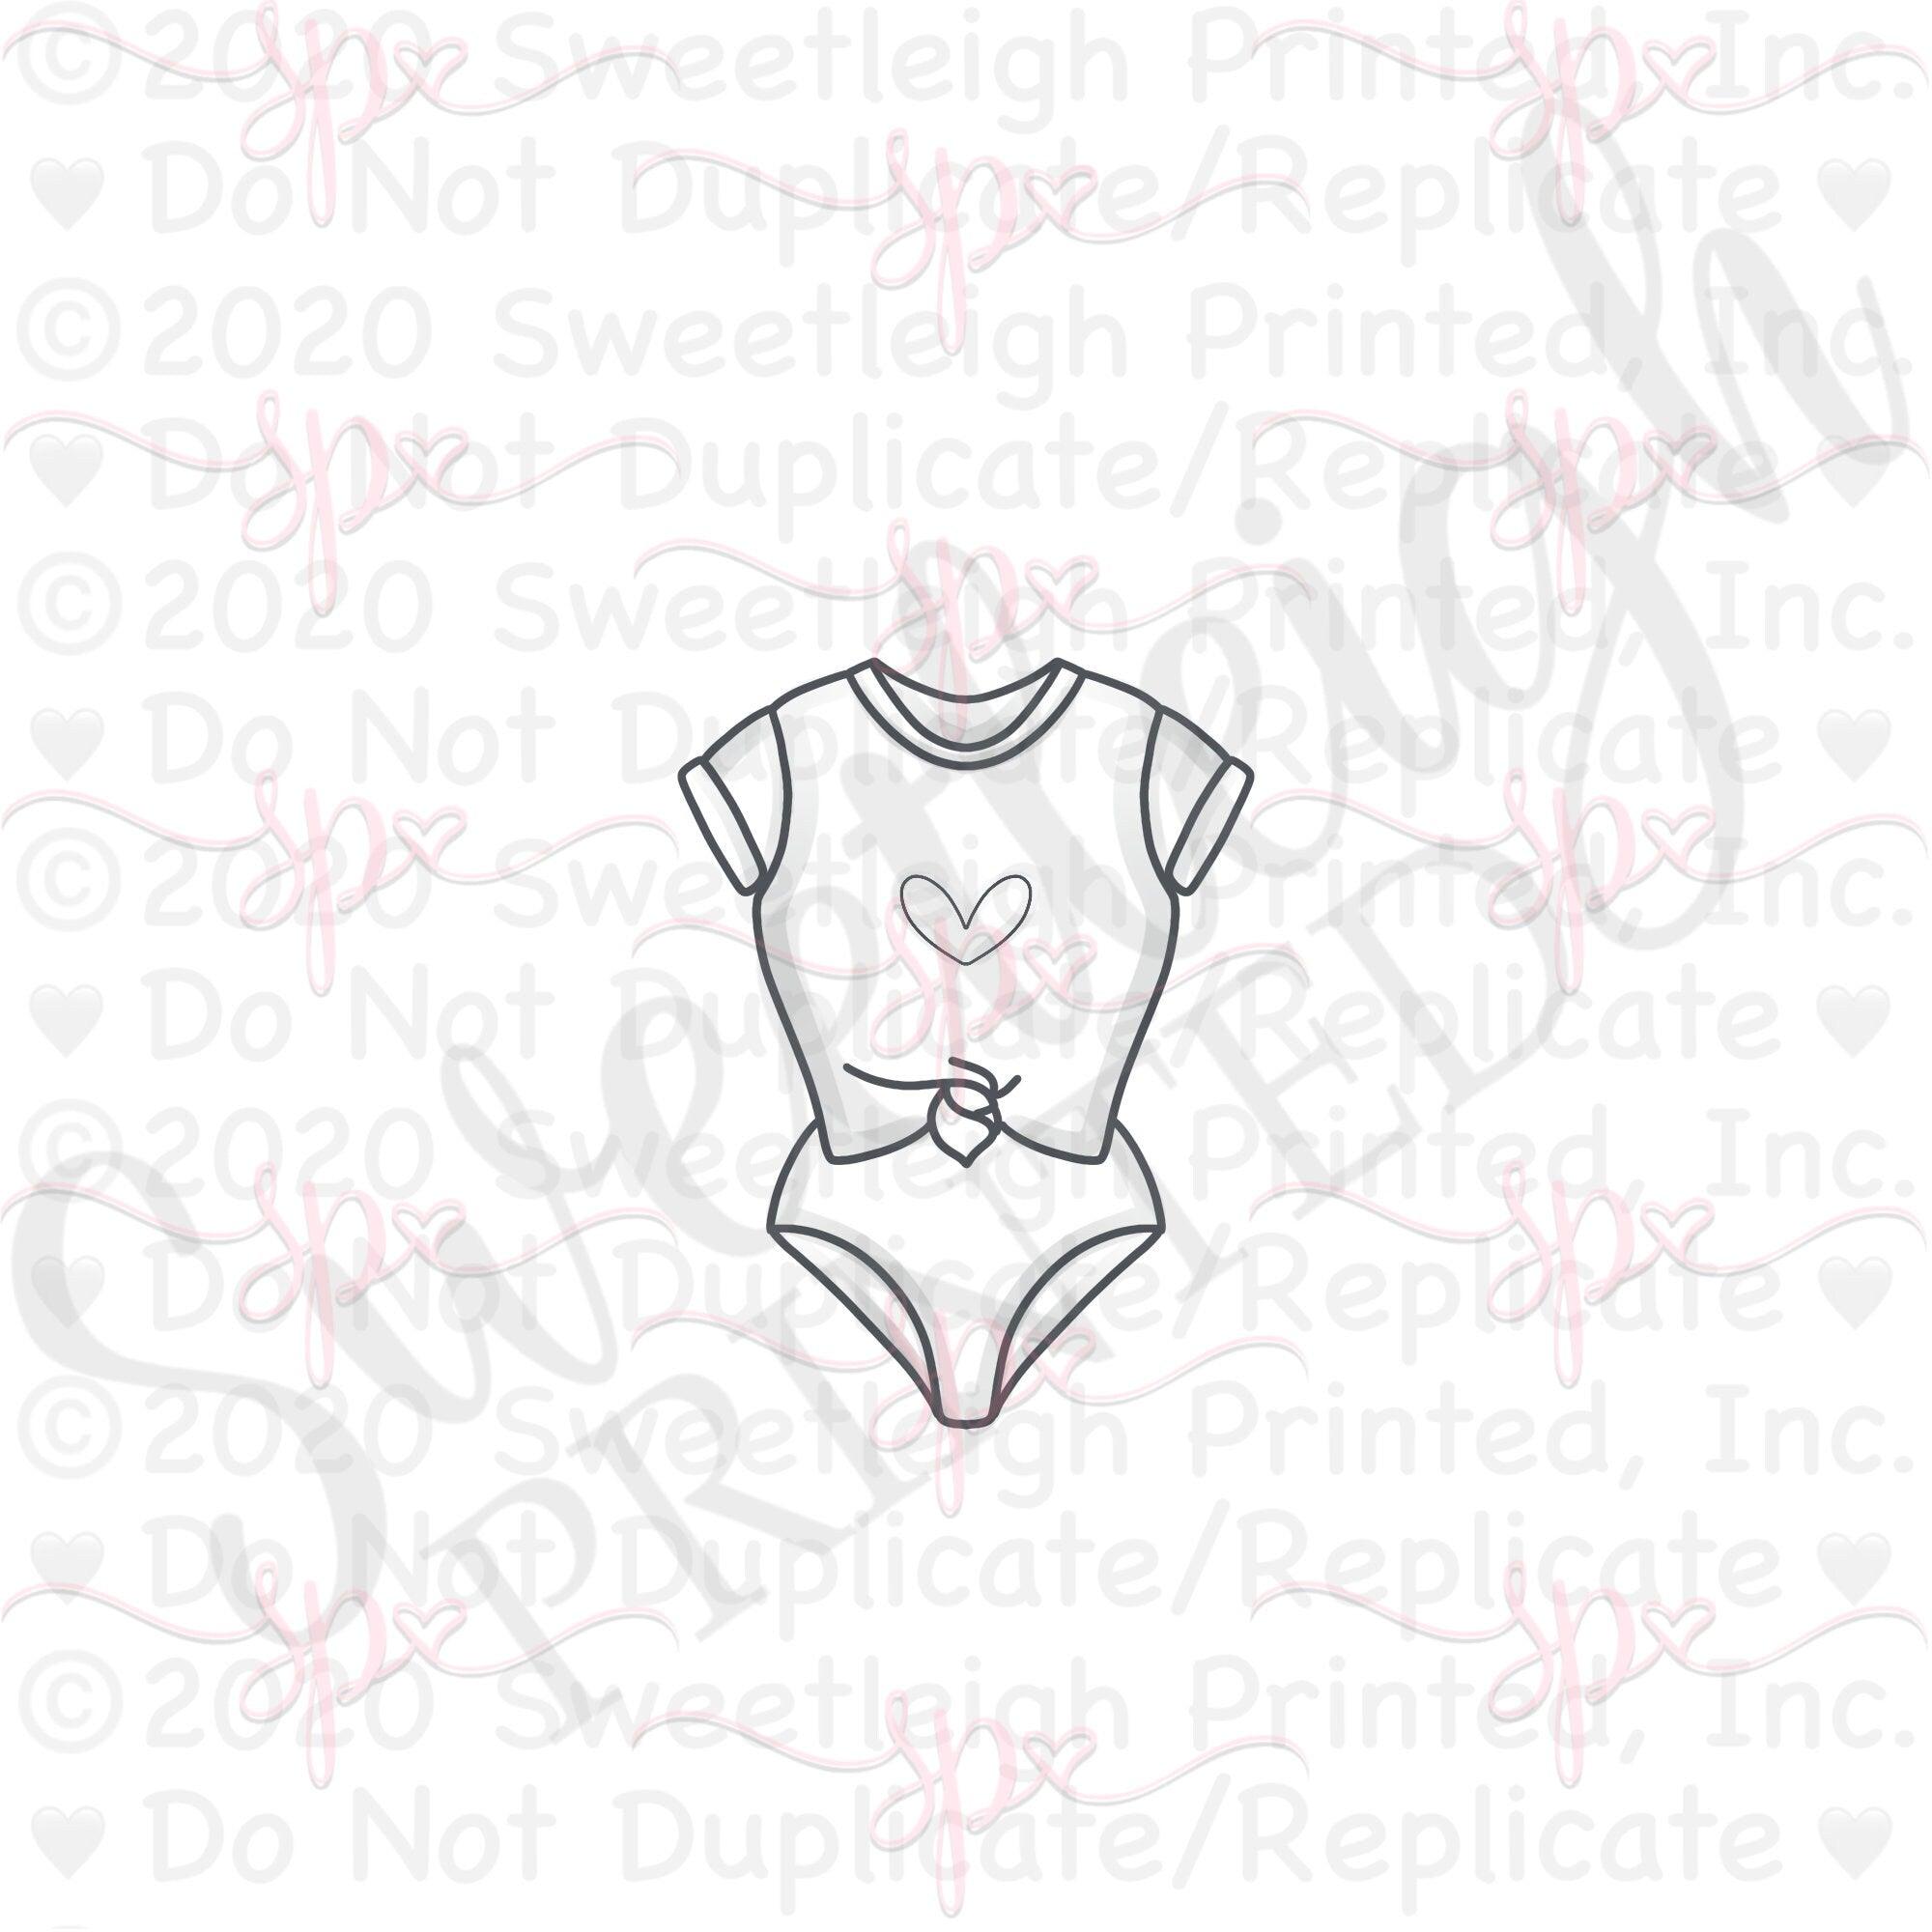 Knotted Tee Bathing Suit Cookie Cutter - Sweetleigh 